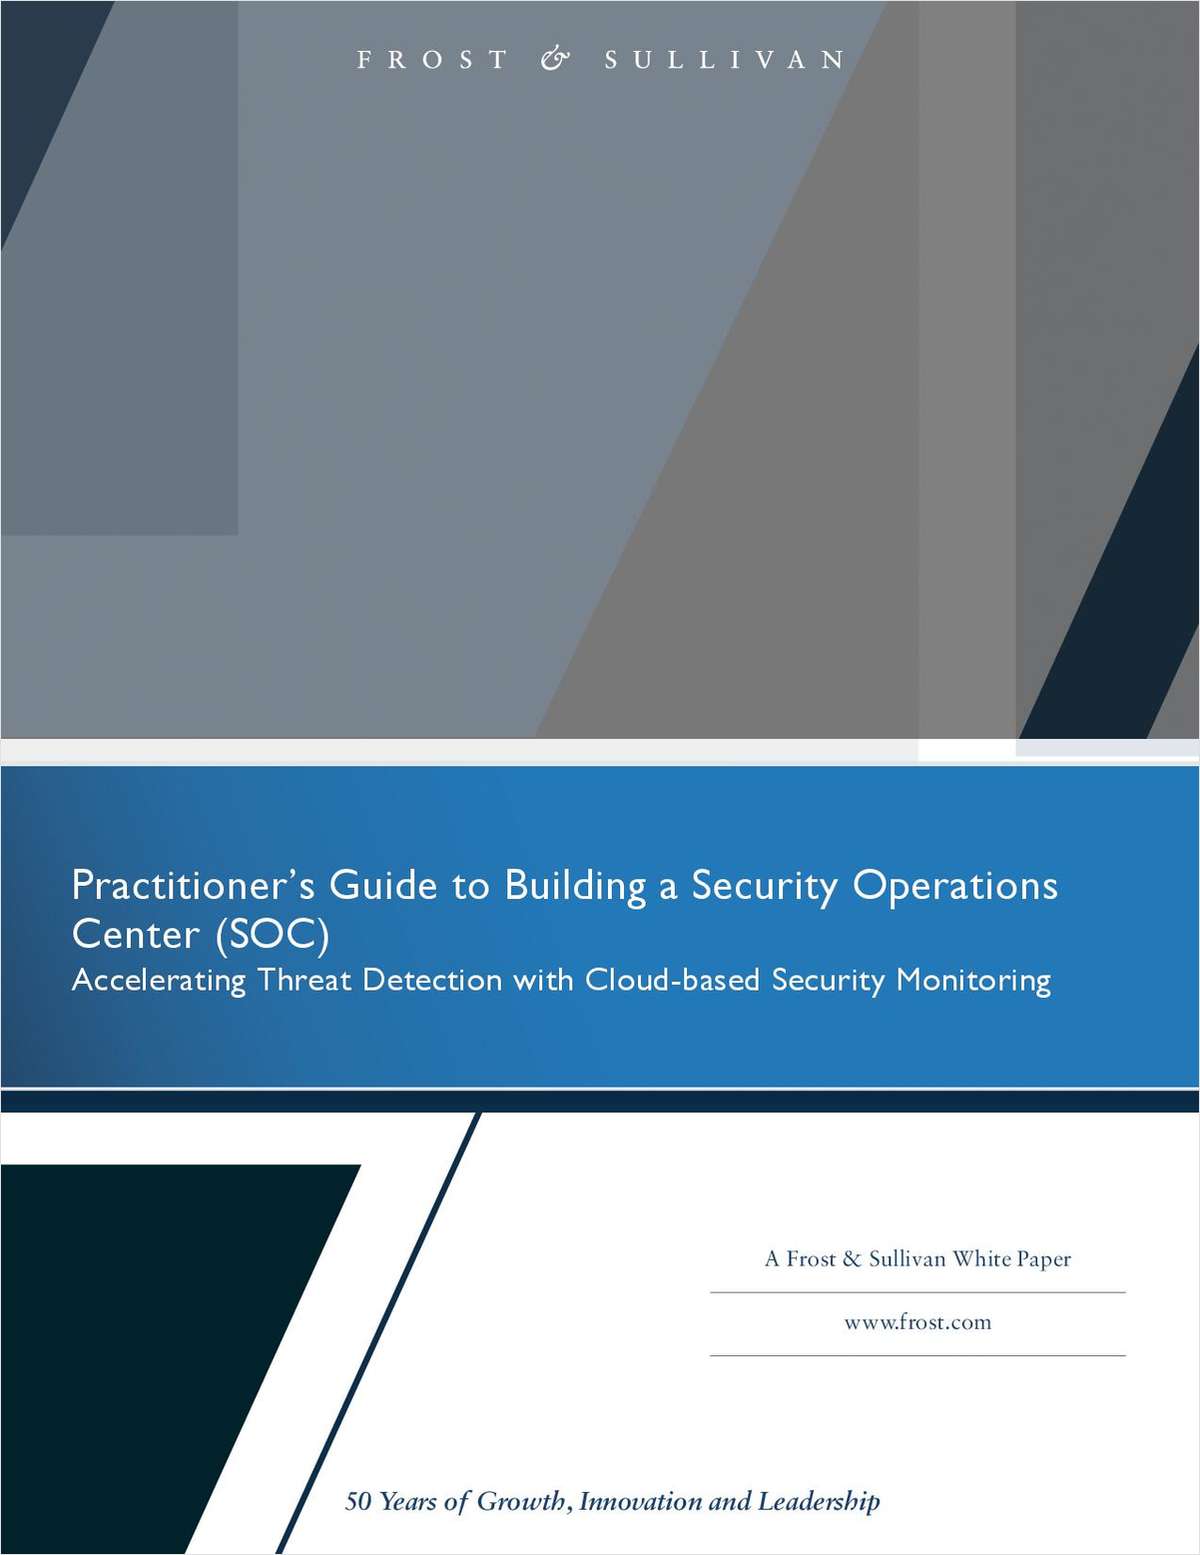 Frost & Sullivan: Practitioner's Guide to Building a Security Operations Center